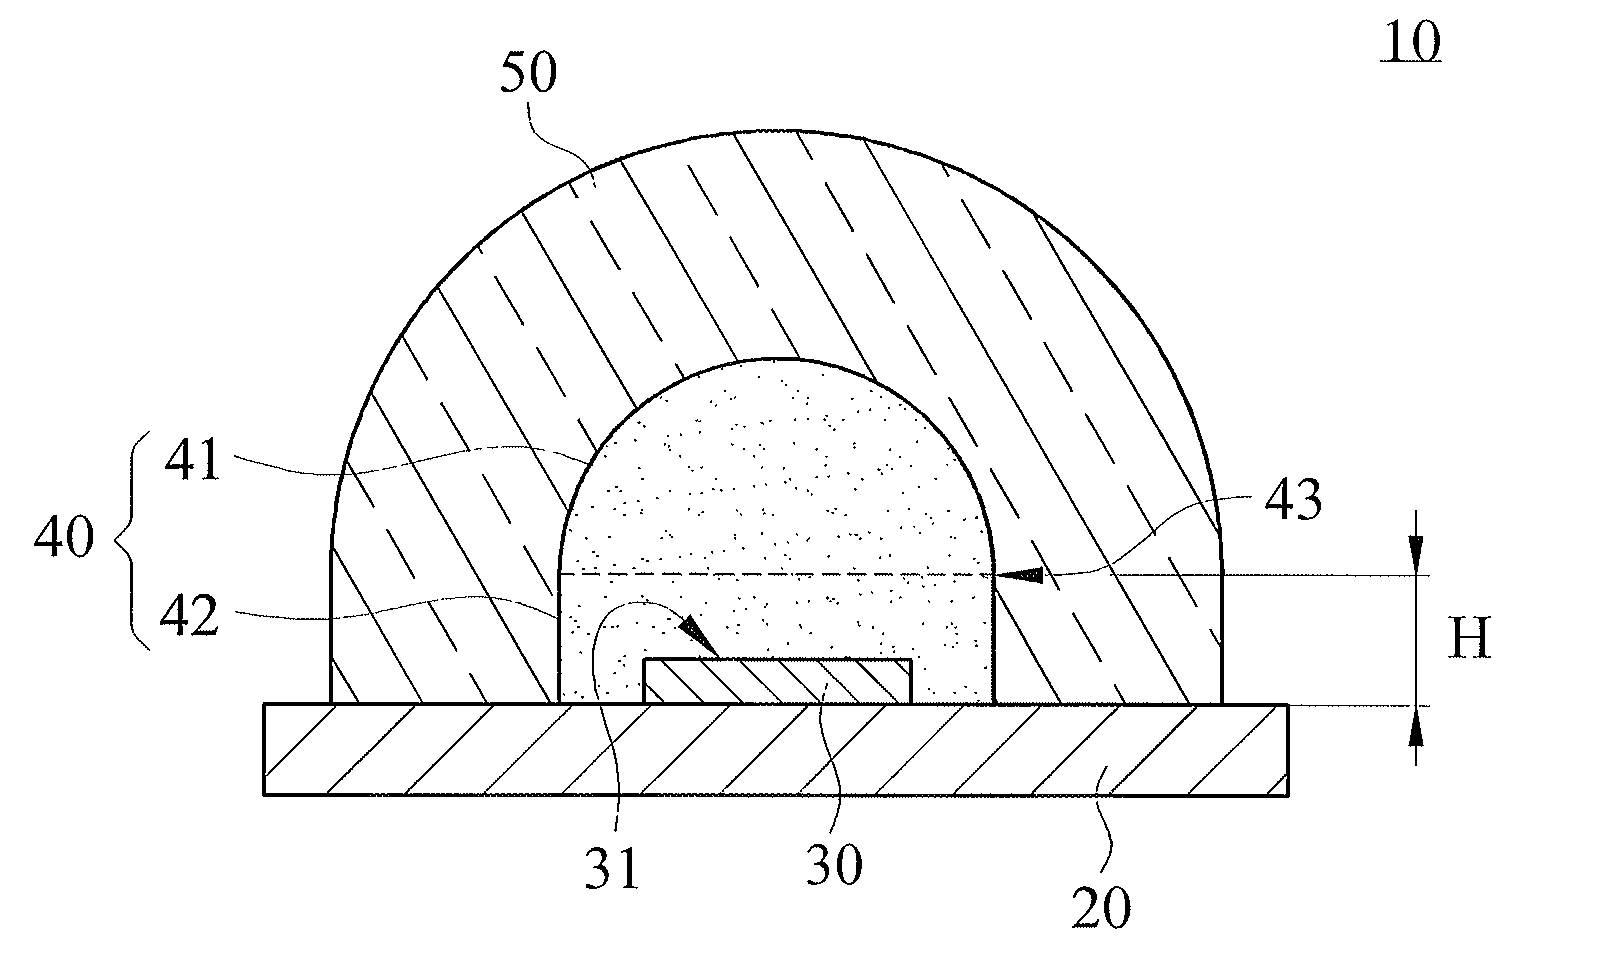 Light-emitting diode packaging structure of low angular correlated color temperature deviation